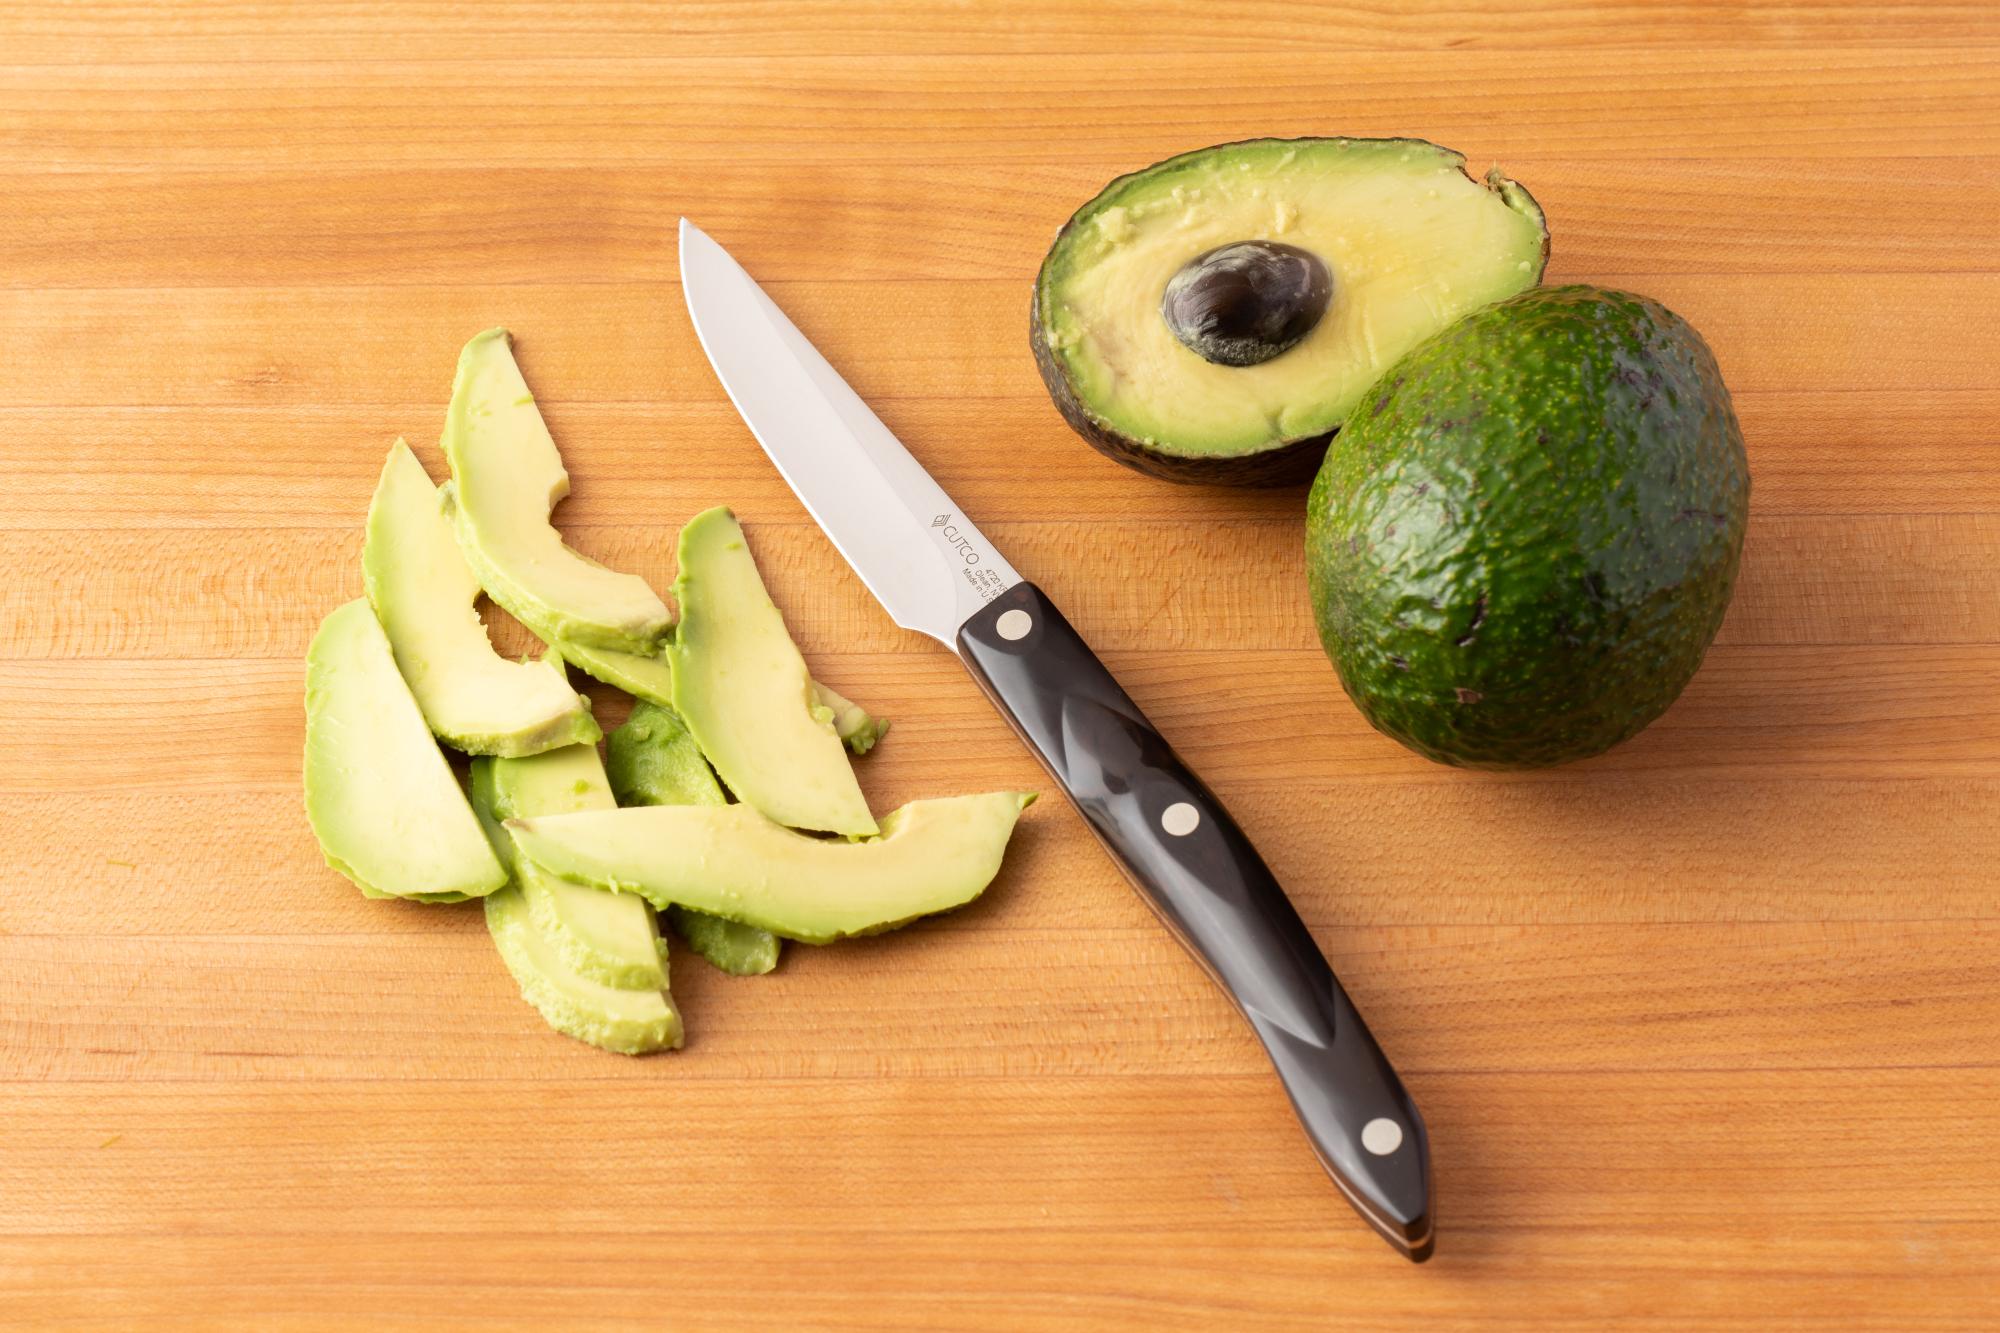 Slice the avocado with a 4 Inch Gourmet Paring Knife.